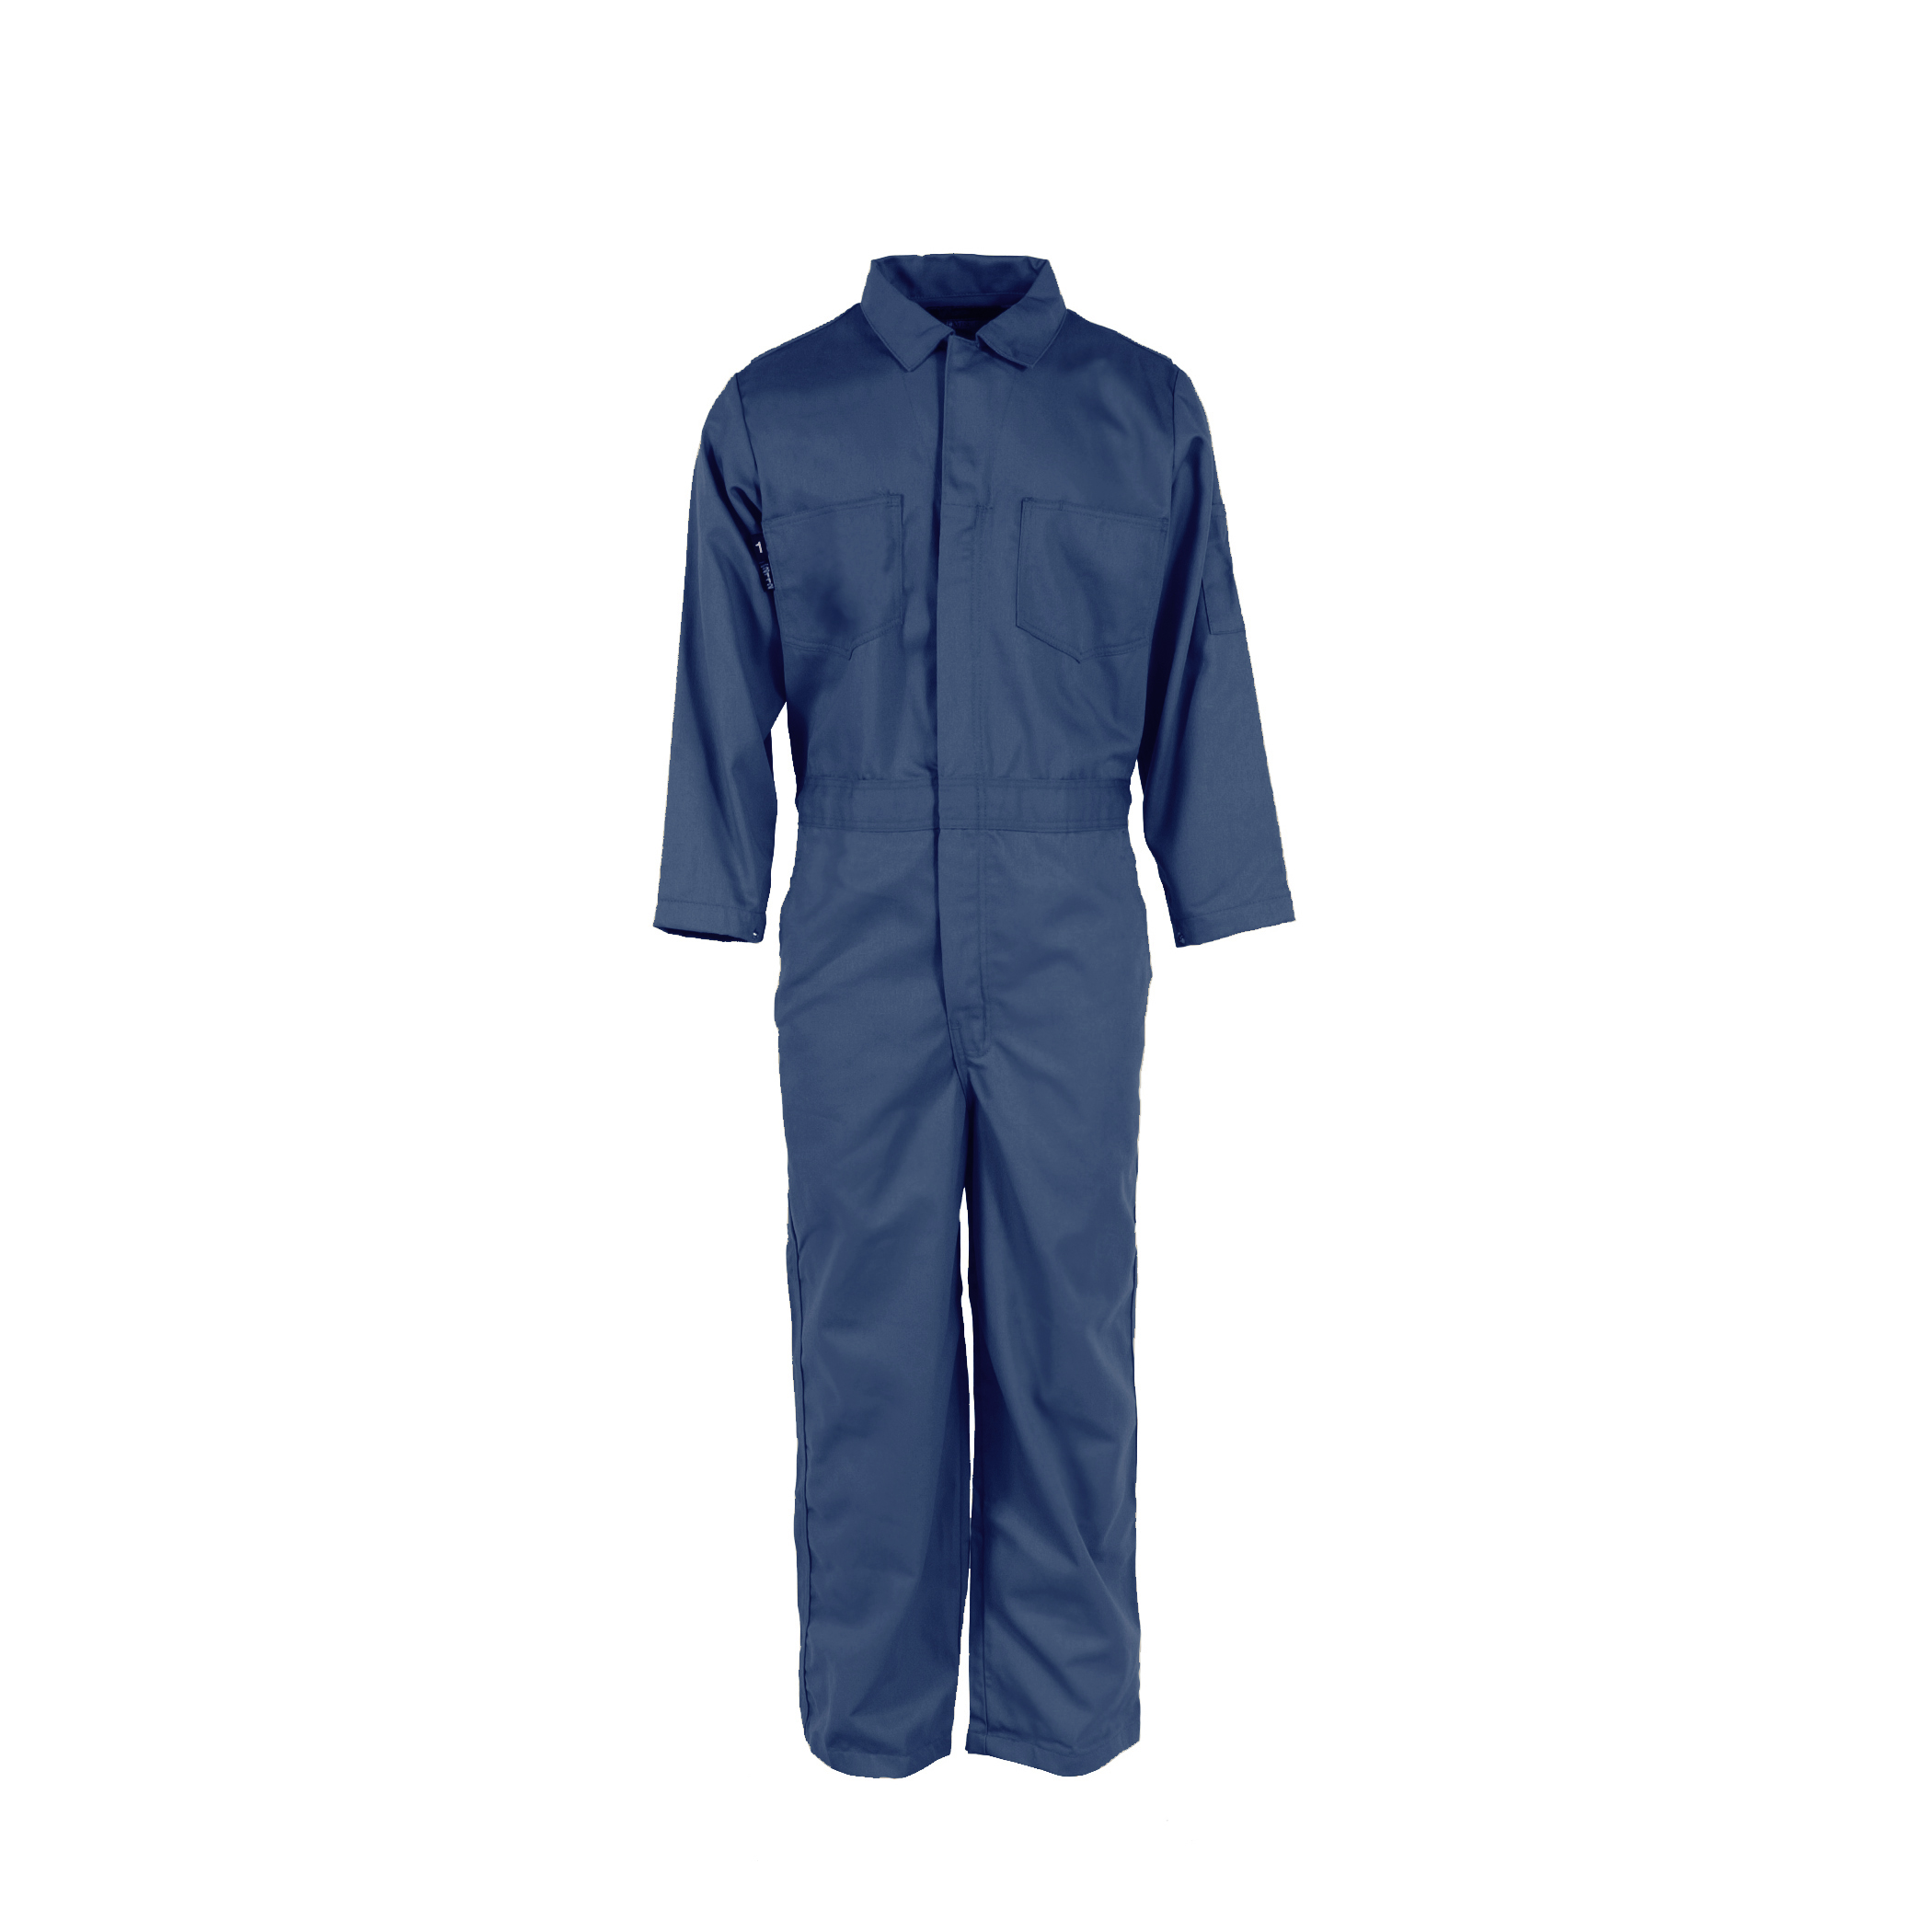 6 oz Nomex FR Coverall - Navy - Size 2X